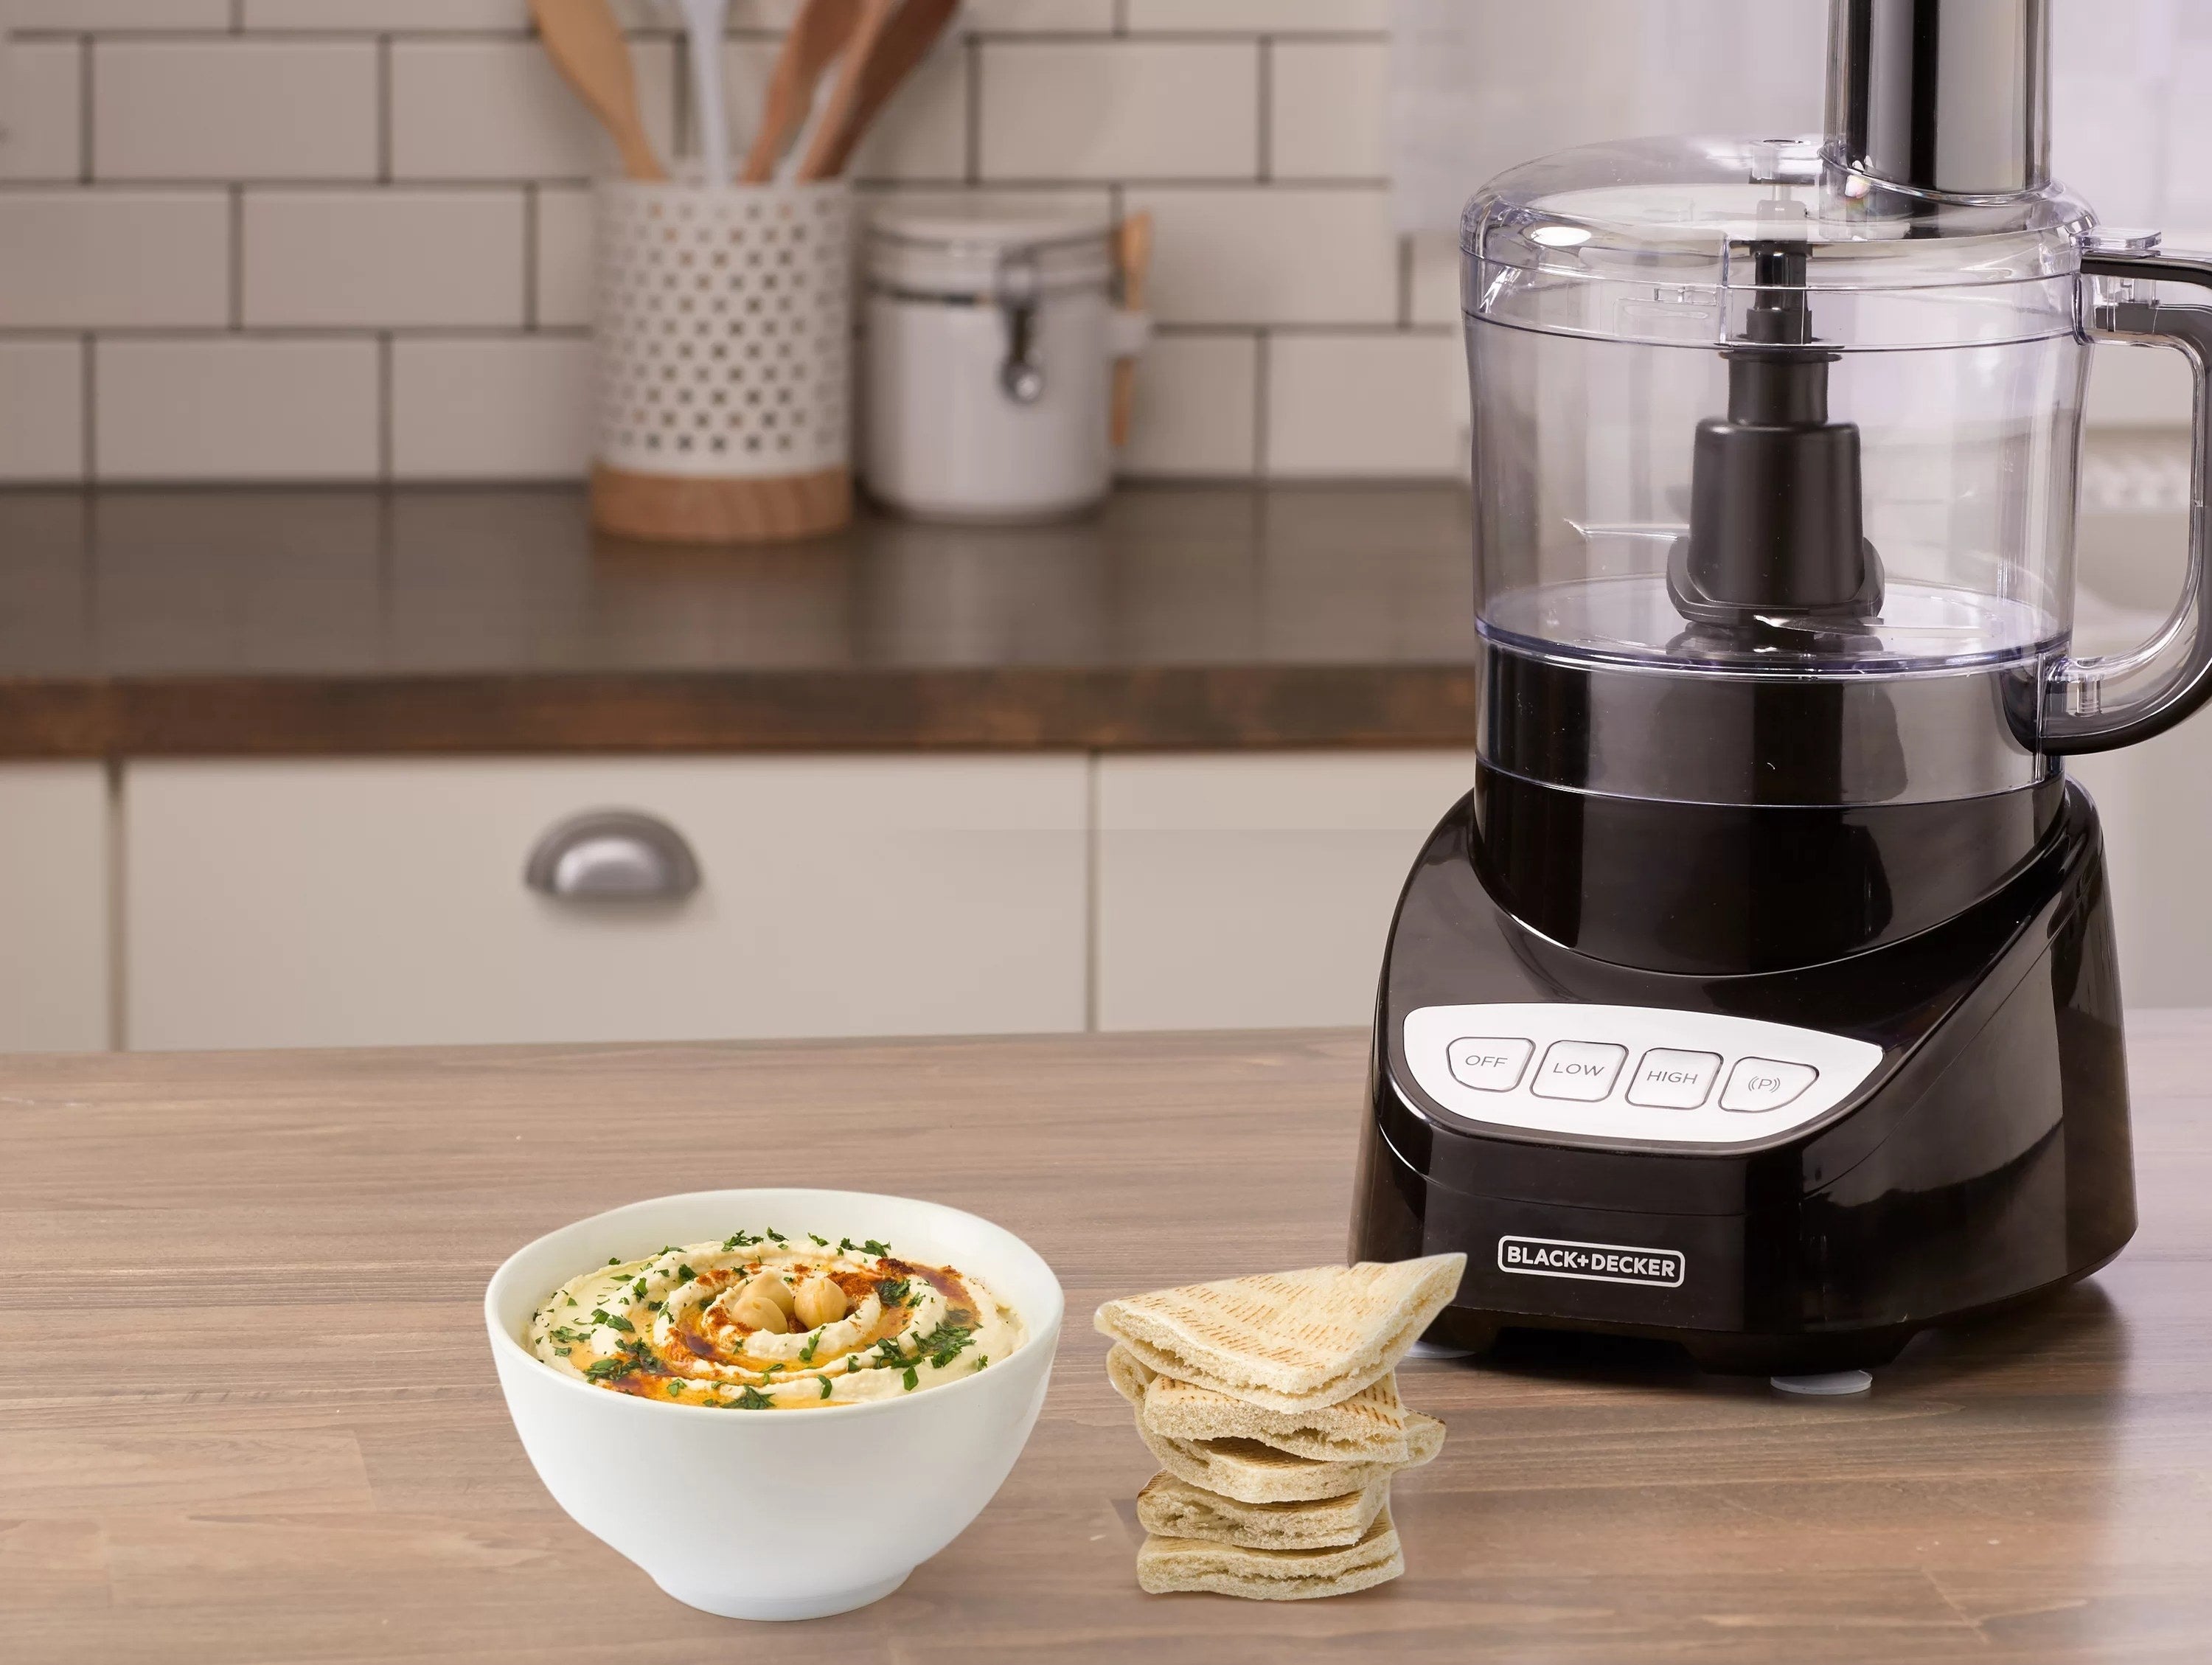 the food processor next to a bowl of hummus and pita bread